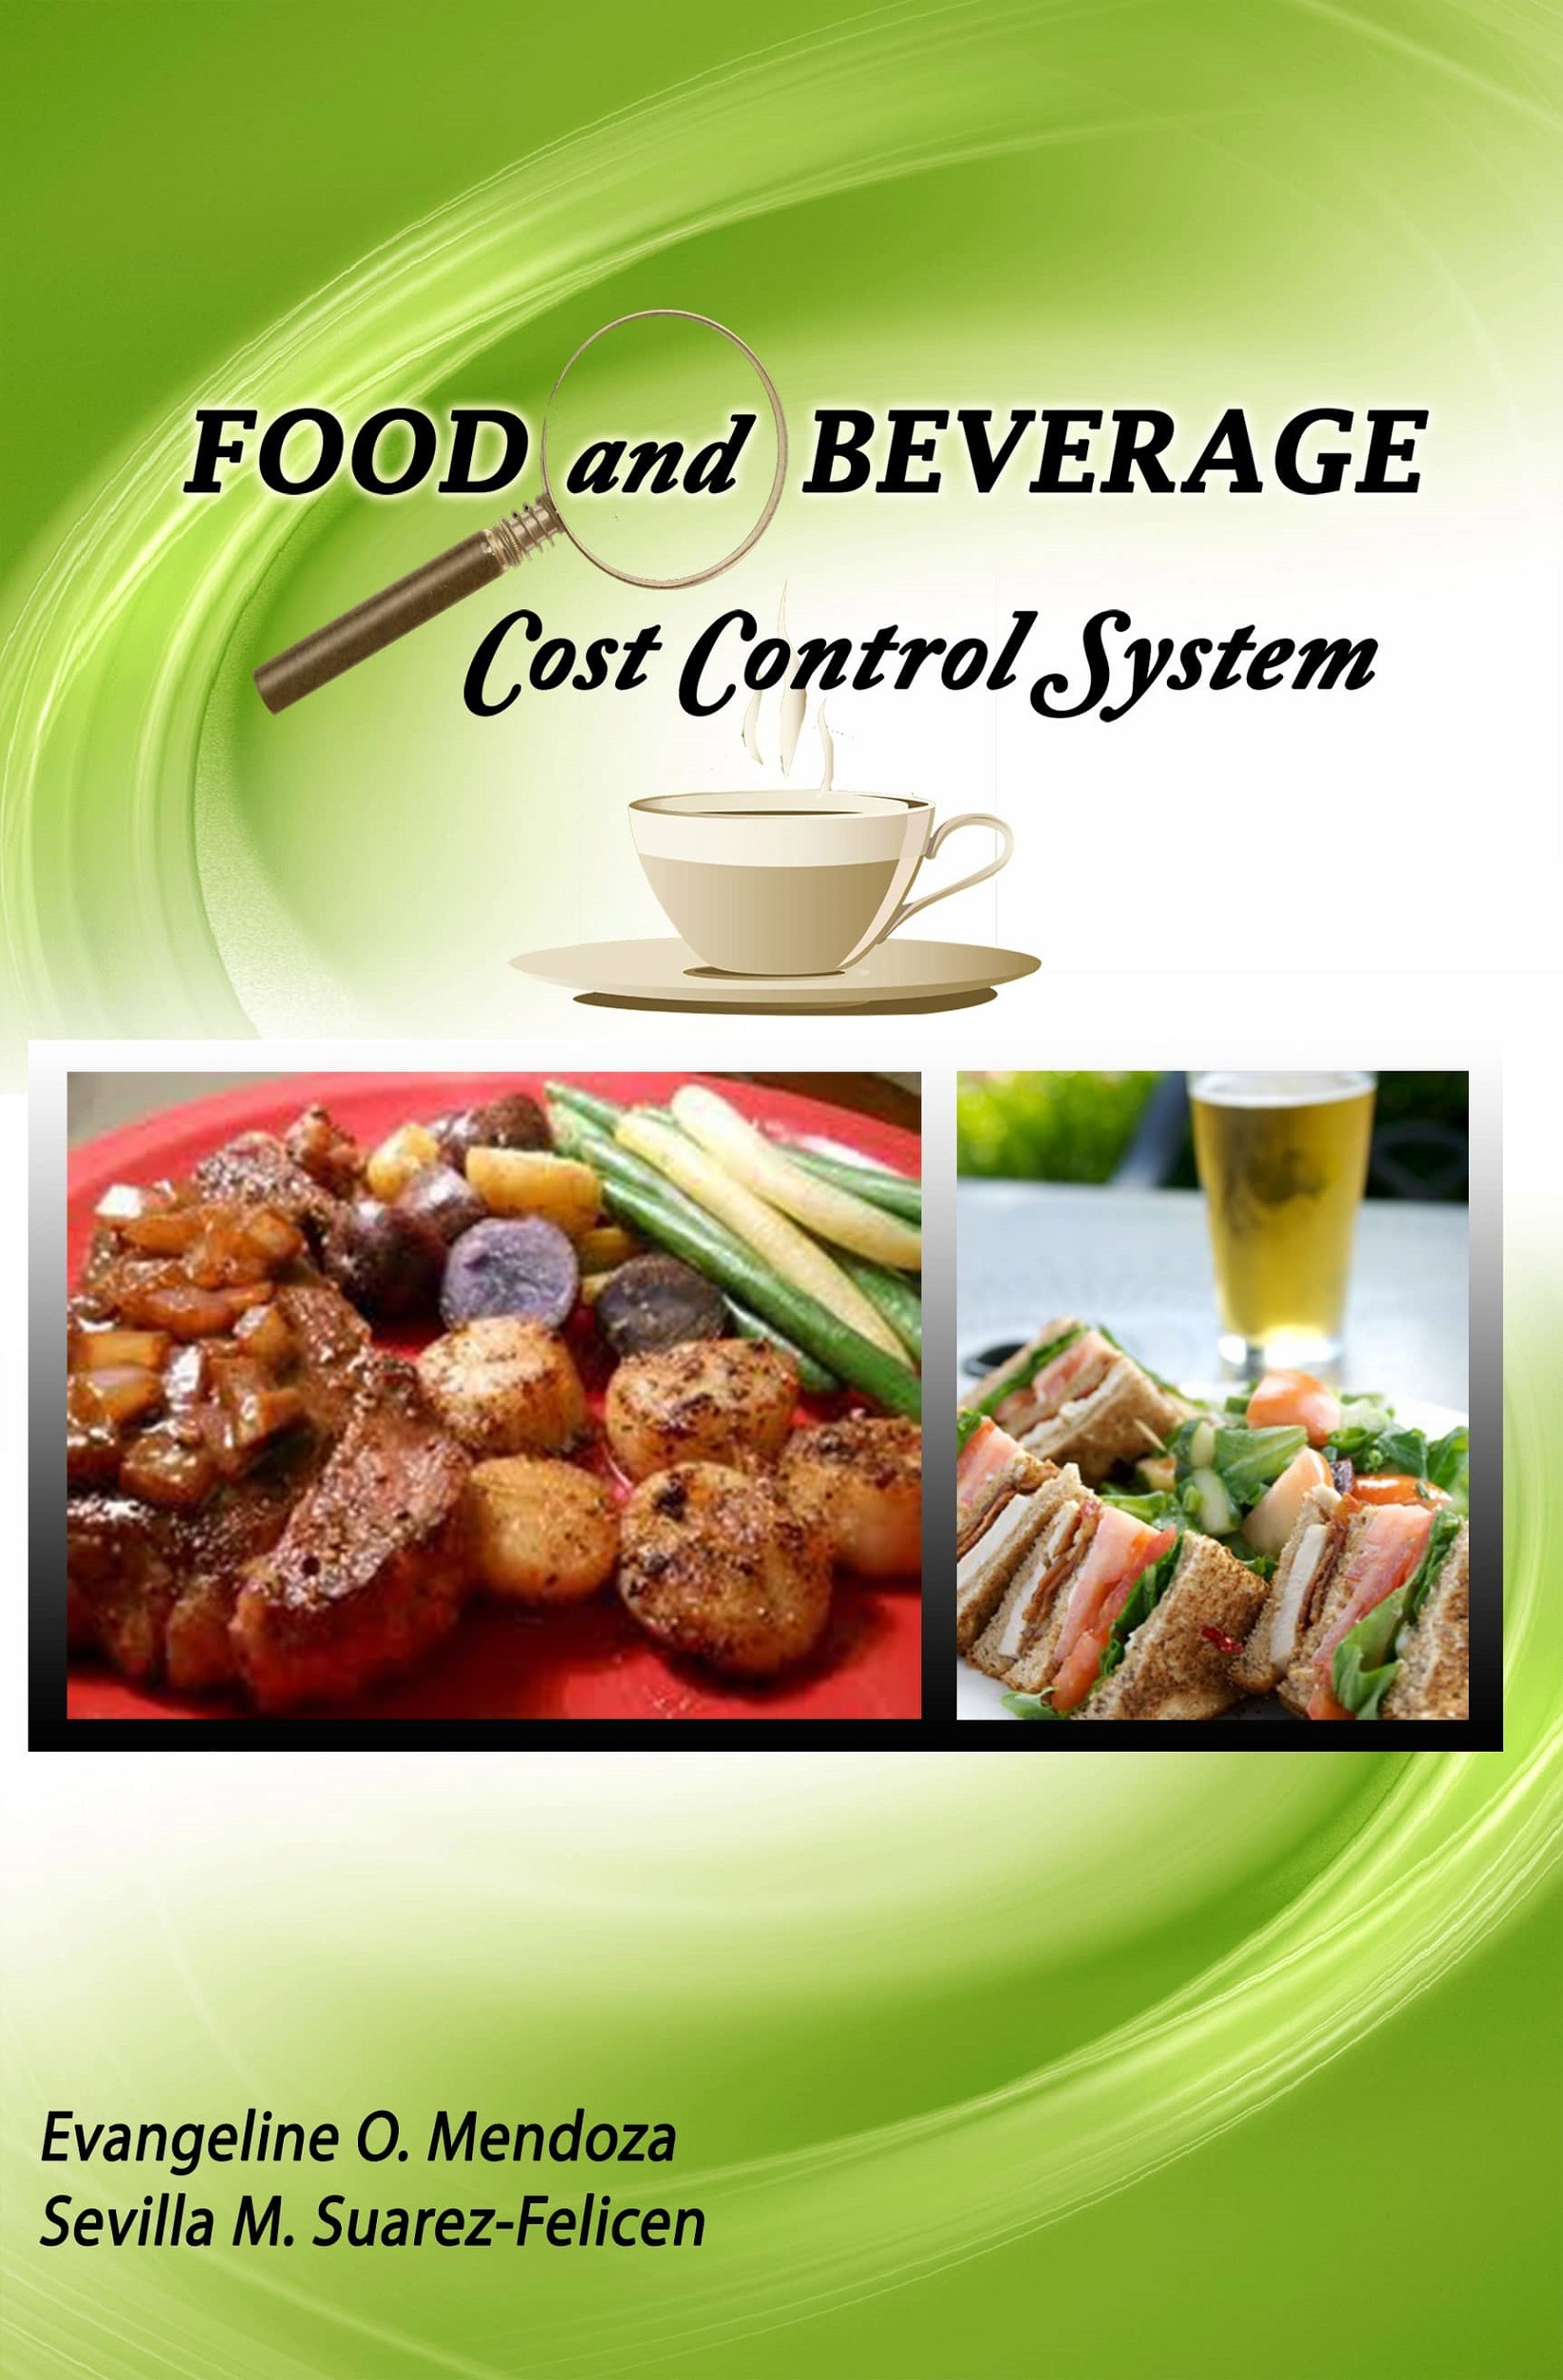 FOOD AND BEVERAGE (Cost Control System) | Books Atbp. Publishing Corp.